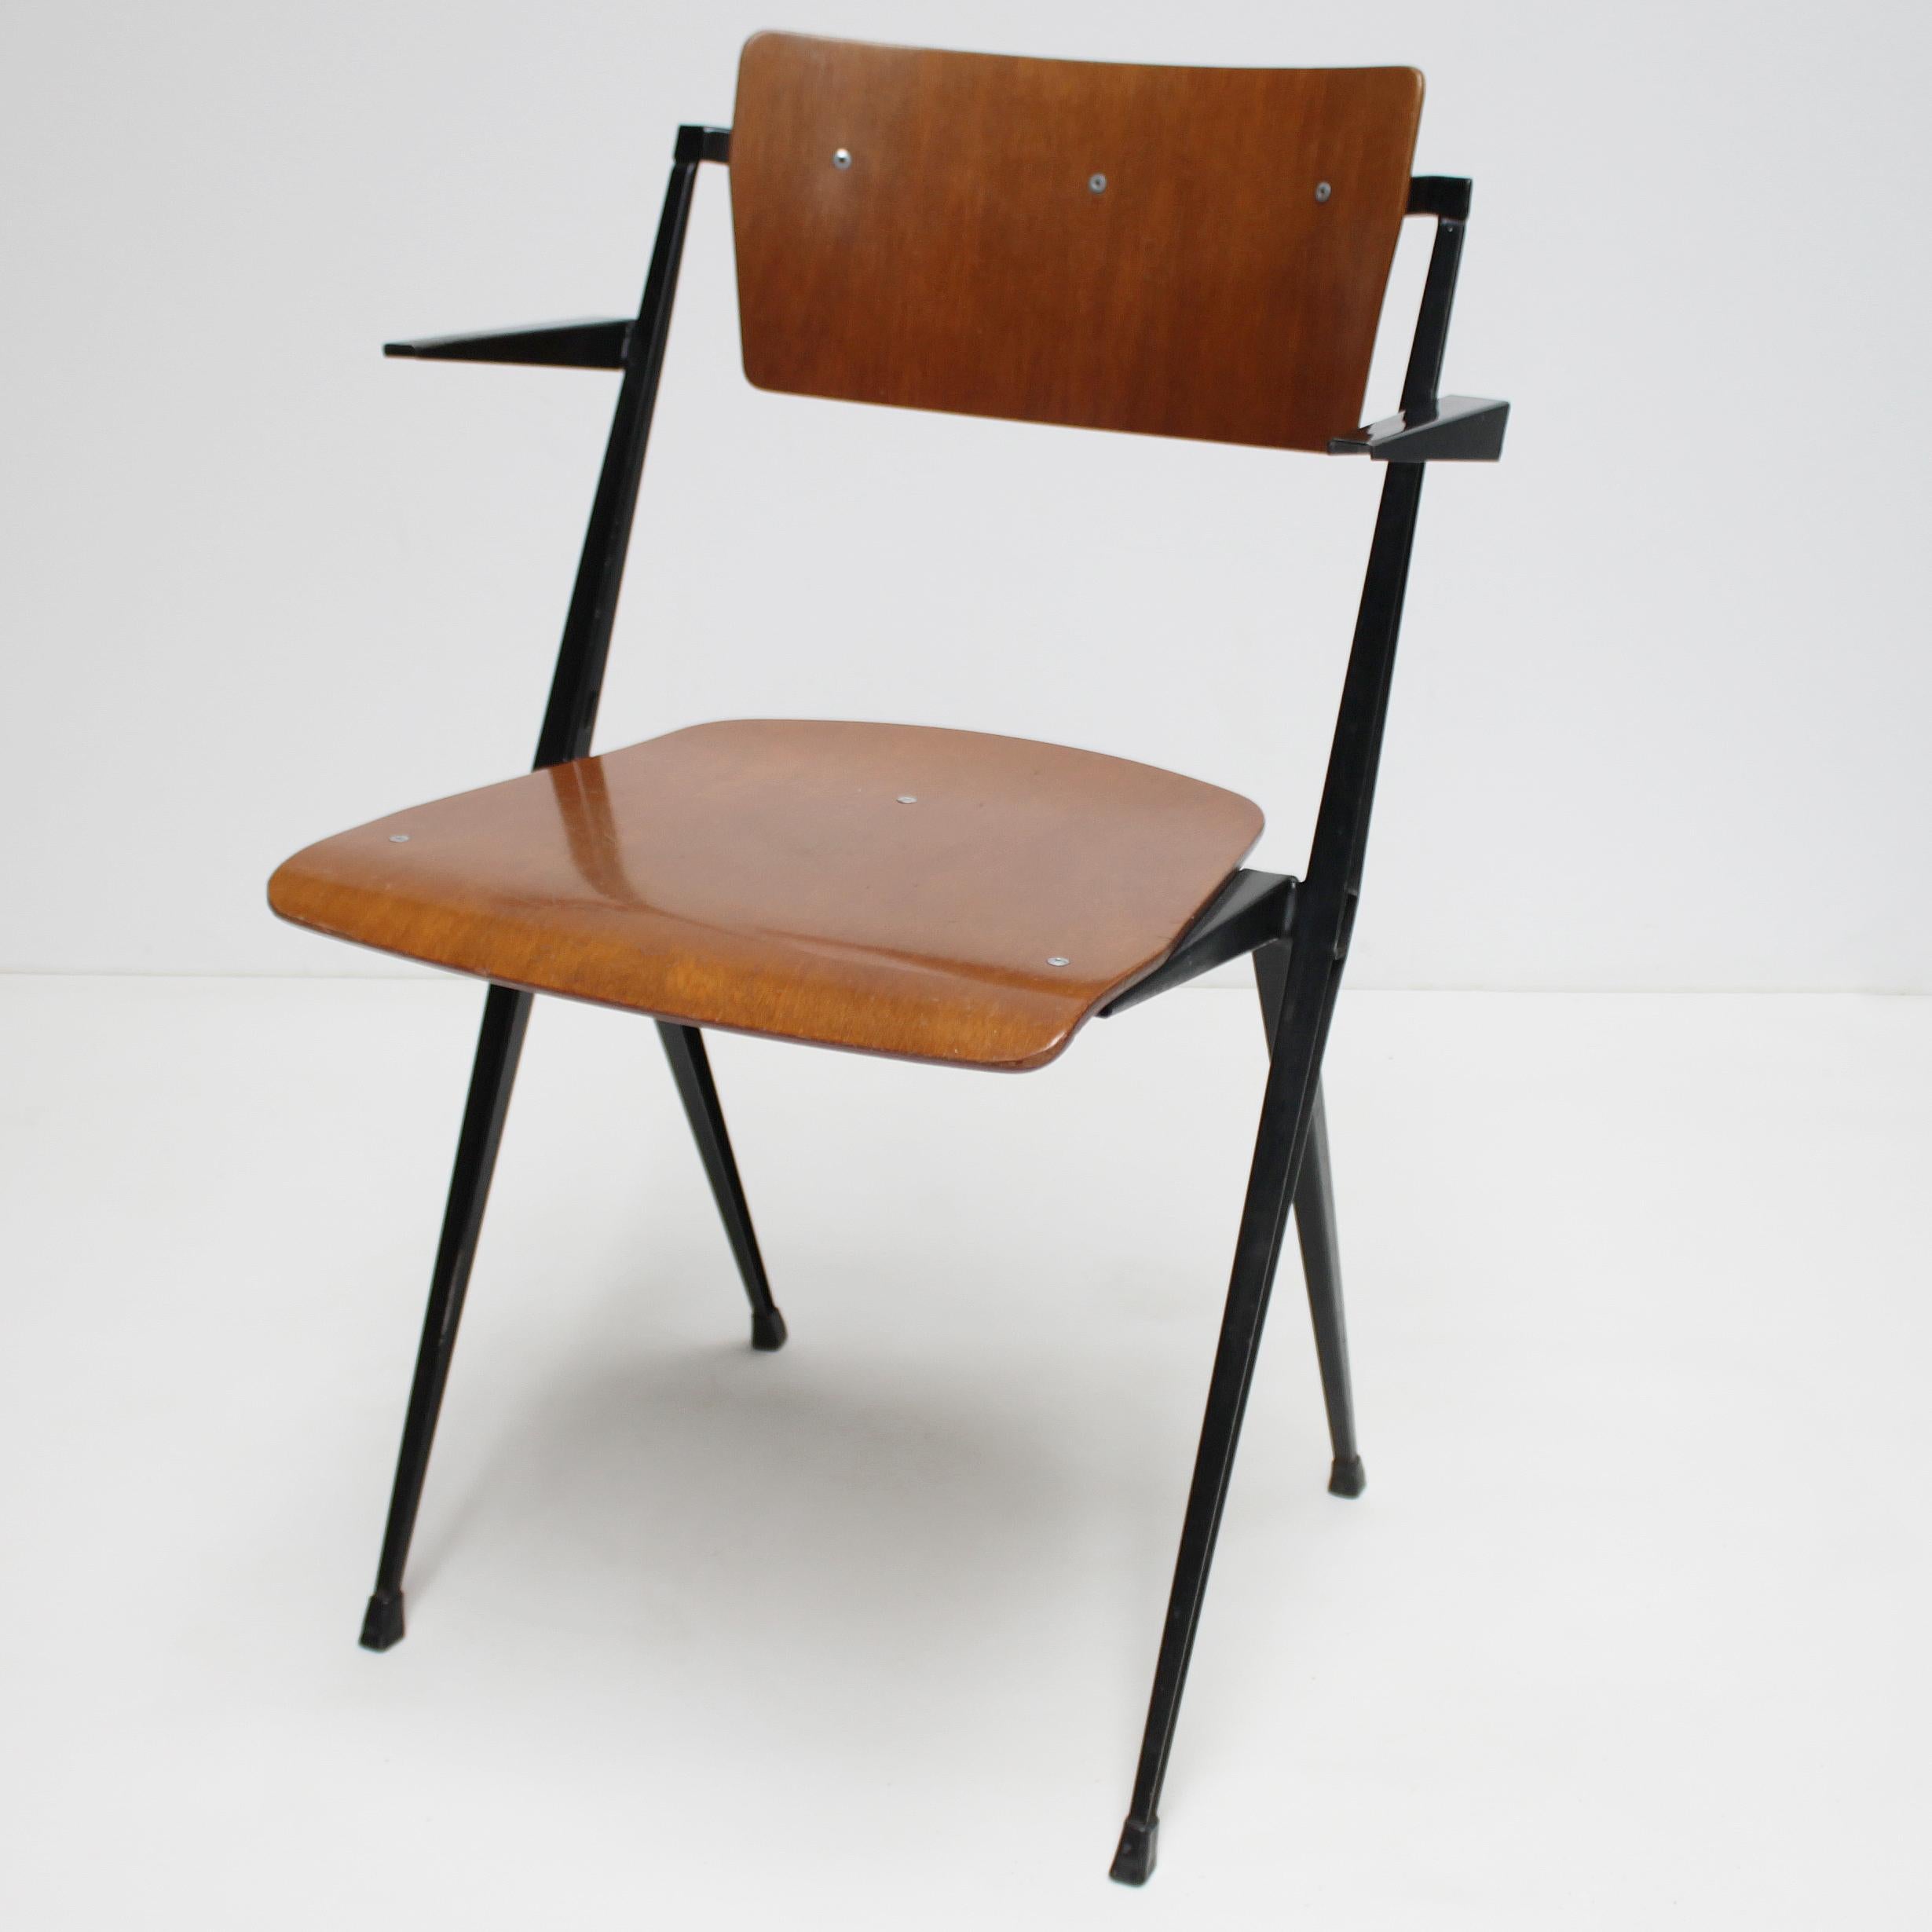 Pyramid armchair by Dutch designer Wim Rietveld for De Cirkel, Holland. Lacquered steel frame with a plywood seat and backrest. Stamped with date of production: 23 December 1965 (see picture).
Dimensions: Height 31.9 in. (81 cm), width 20.9 in. (53